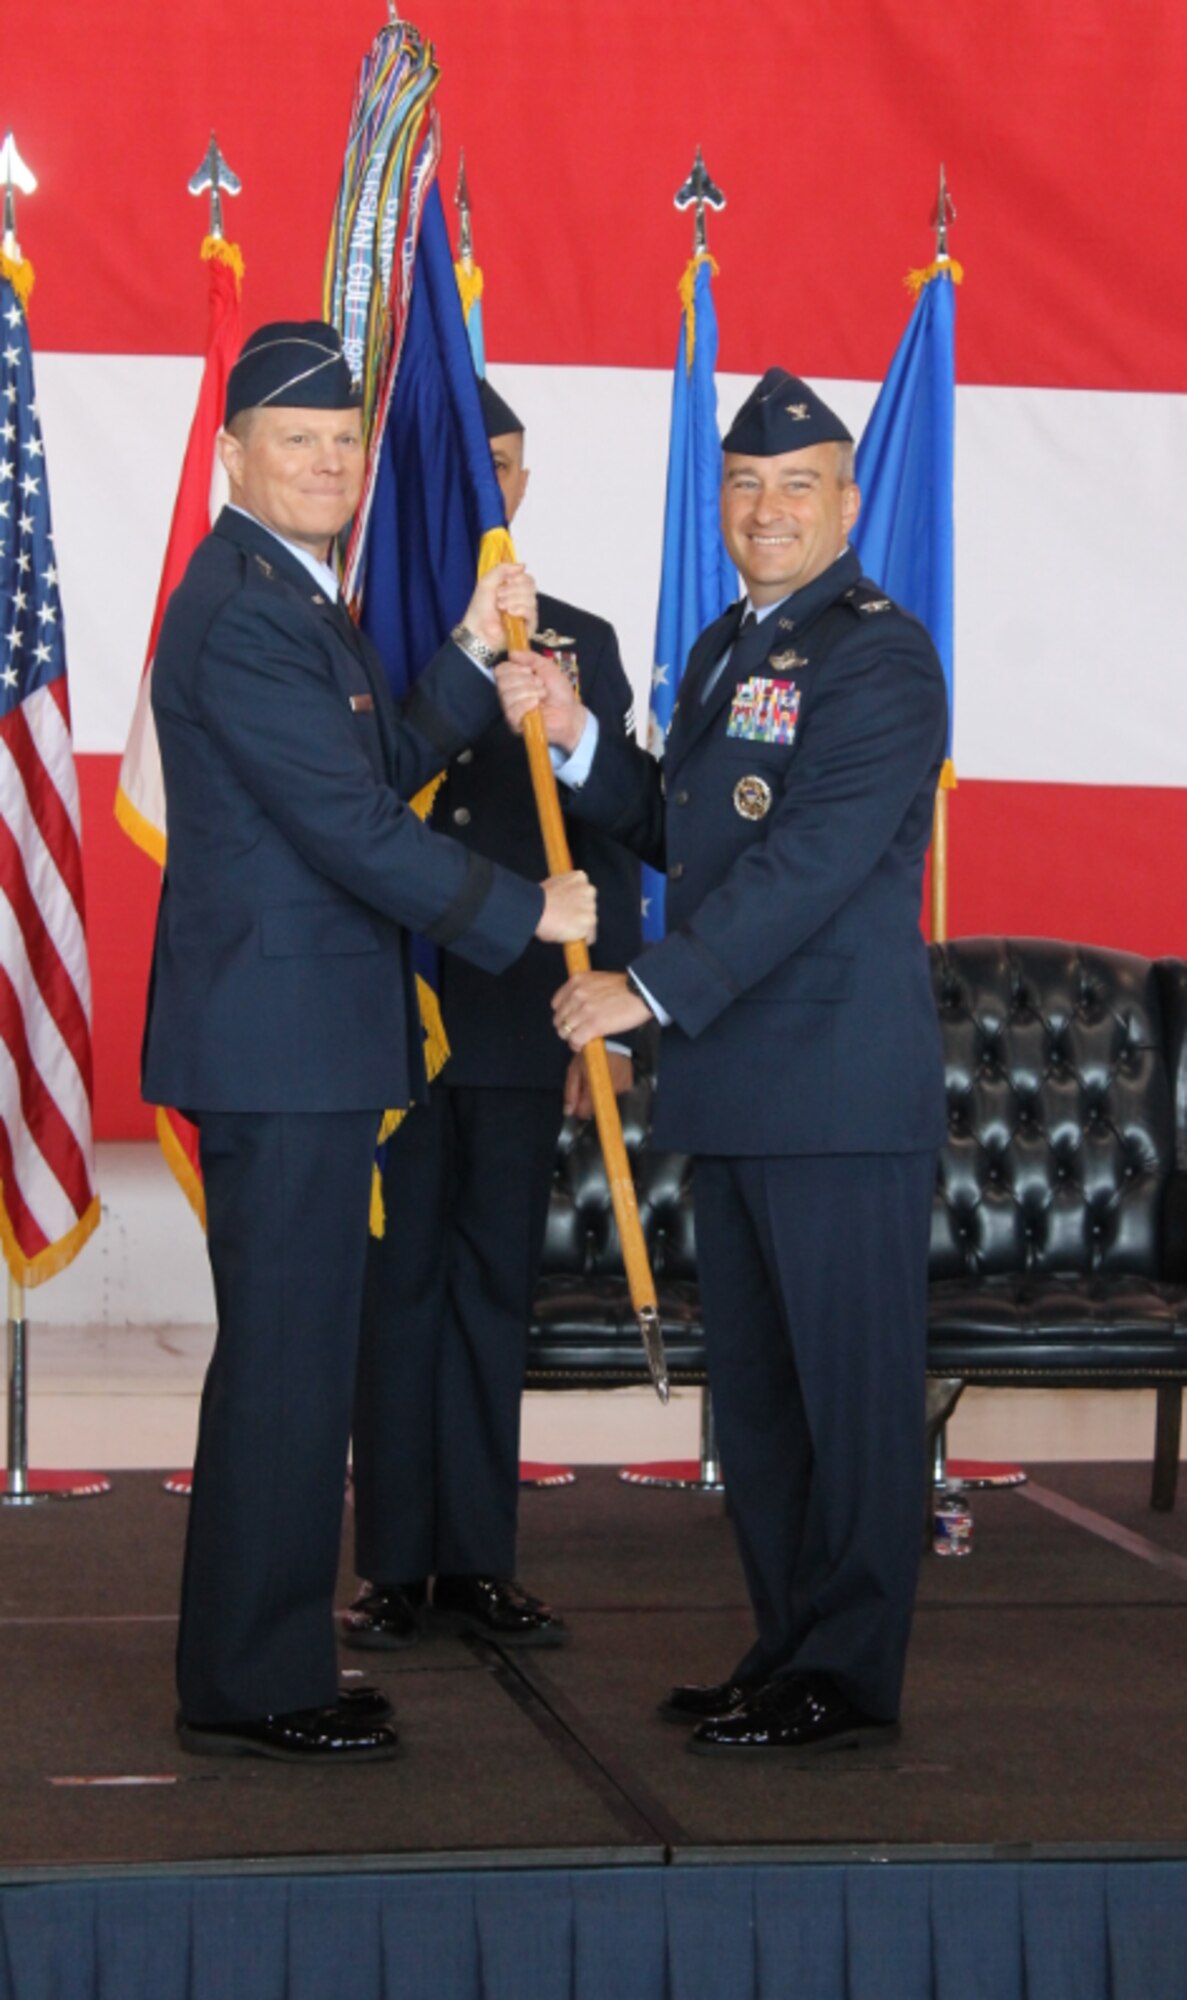 Col. Alain D. Poisson, right, accepts the guideon for the 552nd Air Control Wing from Maj. Gen. Andrew A. Croft, 12th Air Force (Air Forces Southern) commander, during the change of command ceremony June 10, 2019, Tinker Air Force Base, Oklahoma. Col. Geoffrey Weiss relinquished command of the 552 ACW to Col. Alain D. Poisson. (U.S. Air Force photo/2nd Lt. Ashlyn K. Paulson)